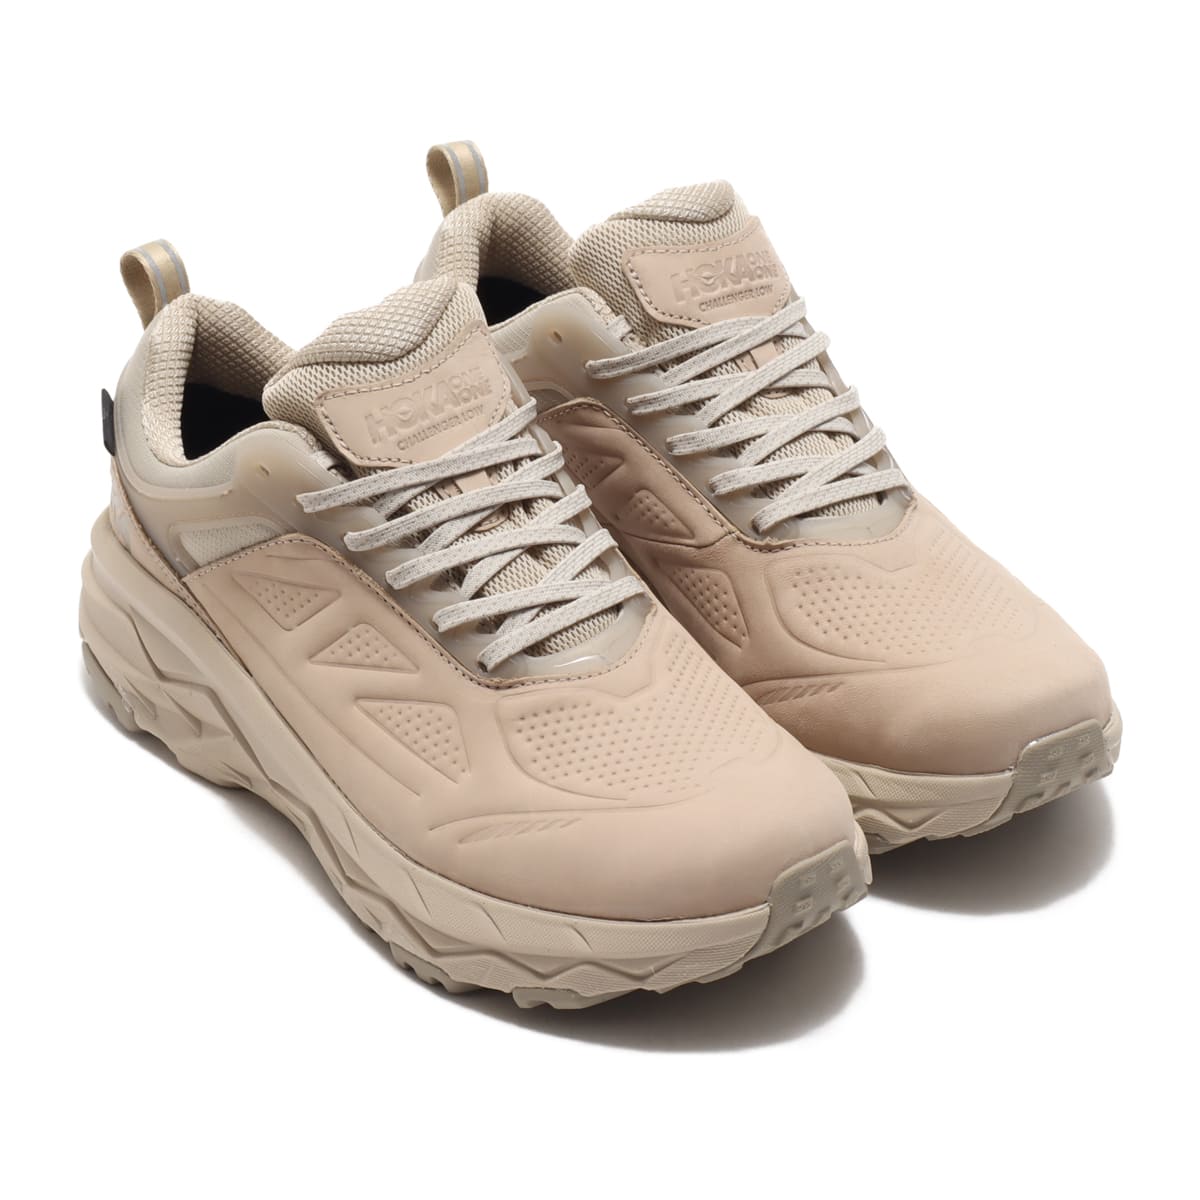 HOKA ONEONE CHALLENGER LOW GORE-TEX WIDE OXFORD TAN/DUNE 20FW-I_photo_large